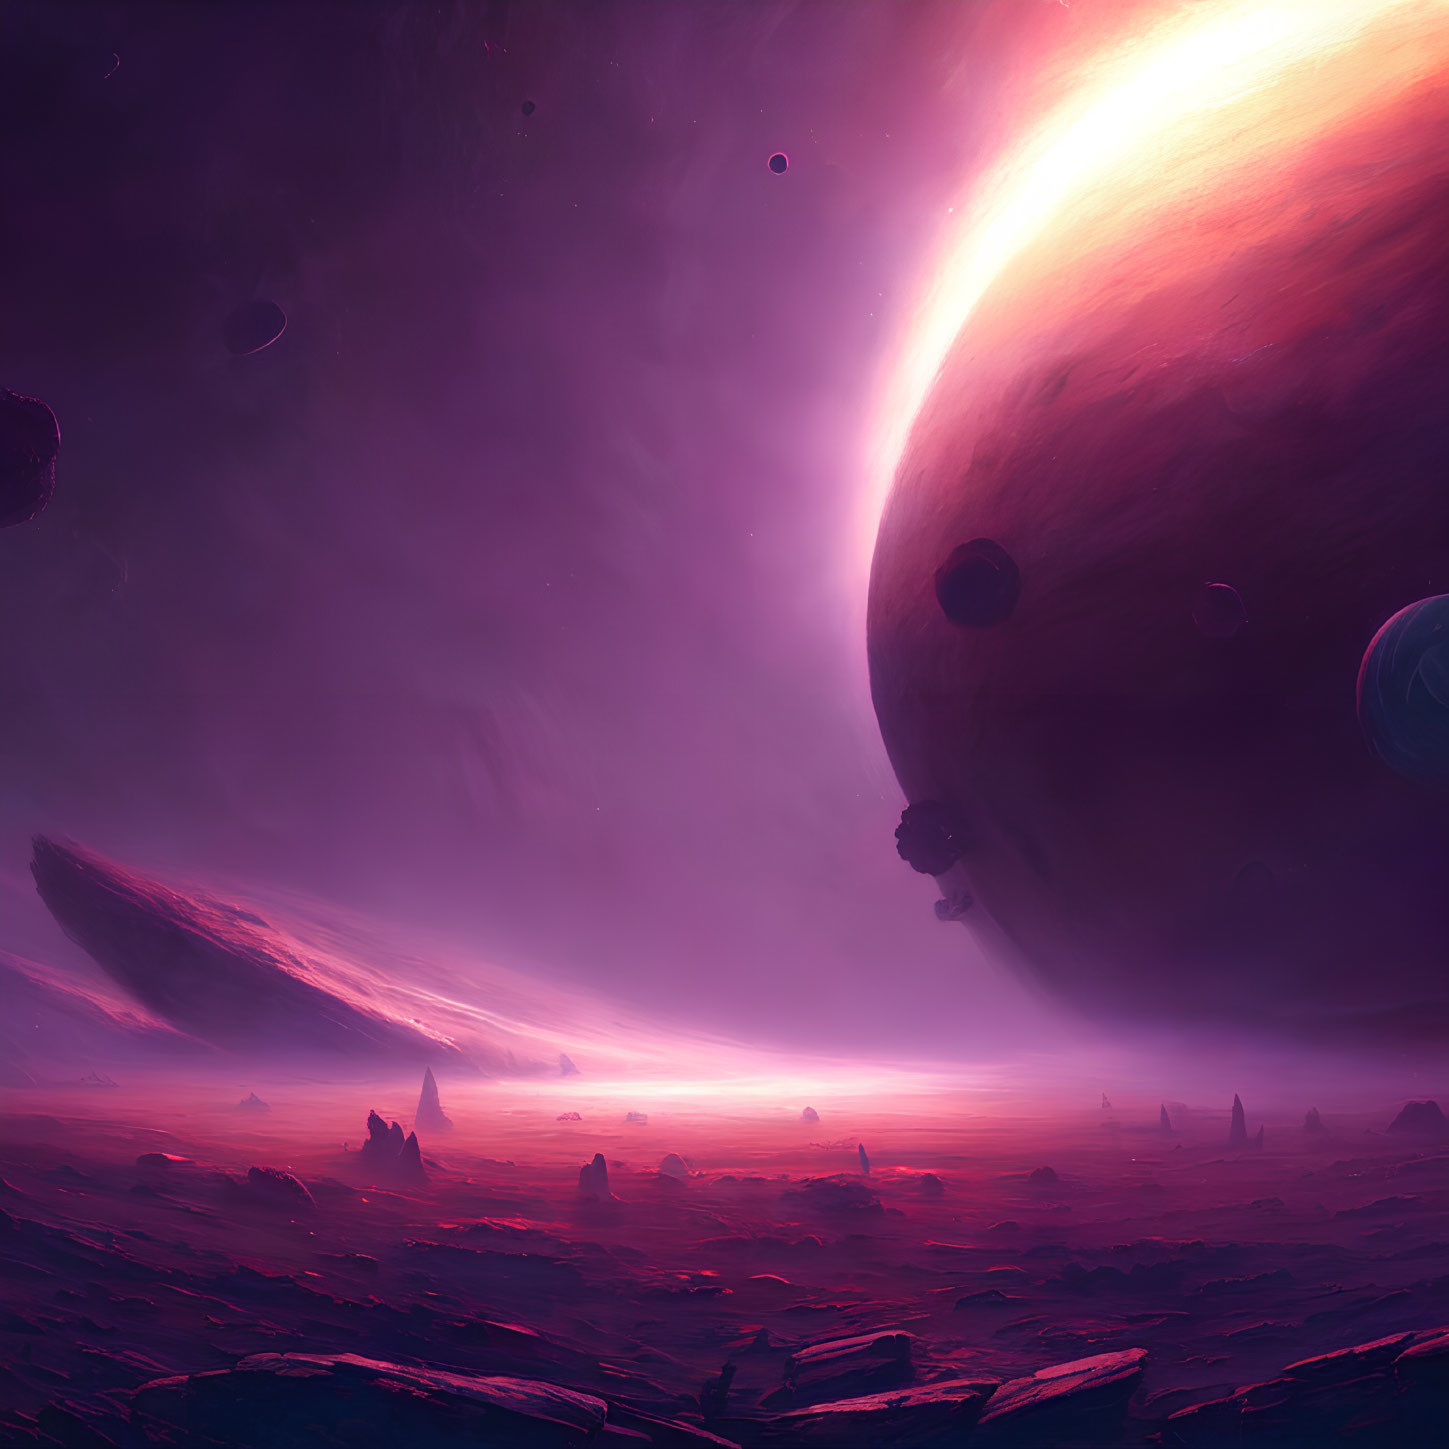 Sci-fi landscape with glowing sun over alien planet and asteroids